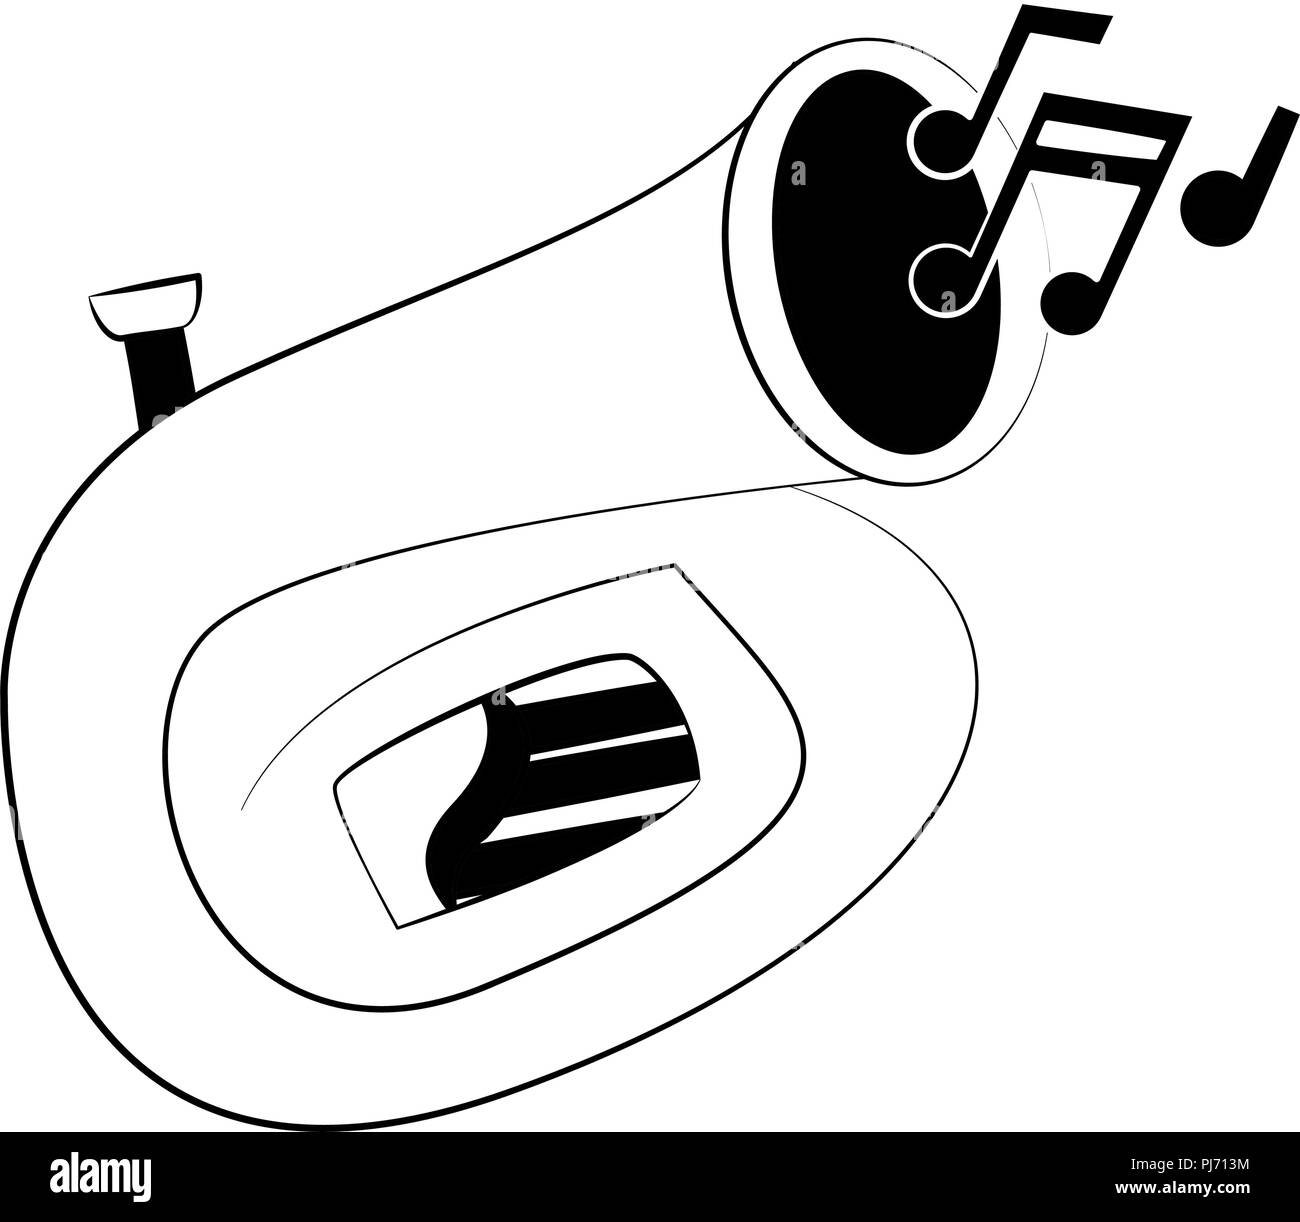 Sousaphone music instrument in black and white Stock Vector